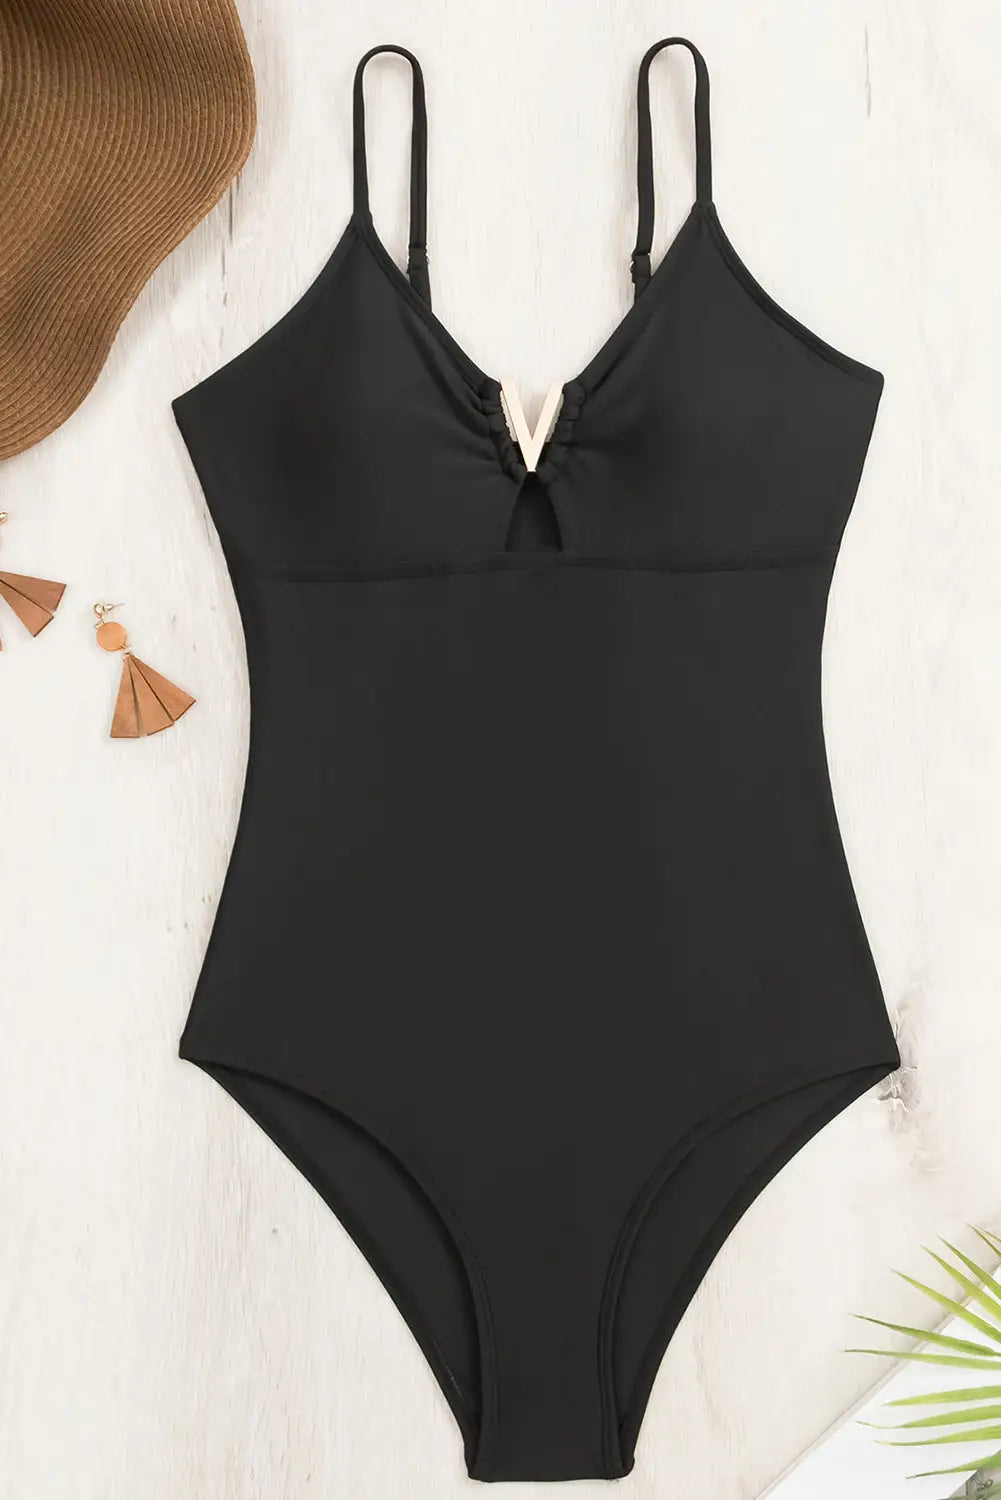 Classic chic one-piece swimsuit - high waist swimsuits